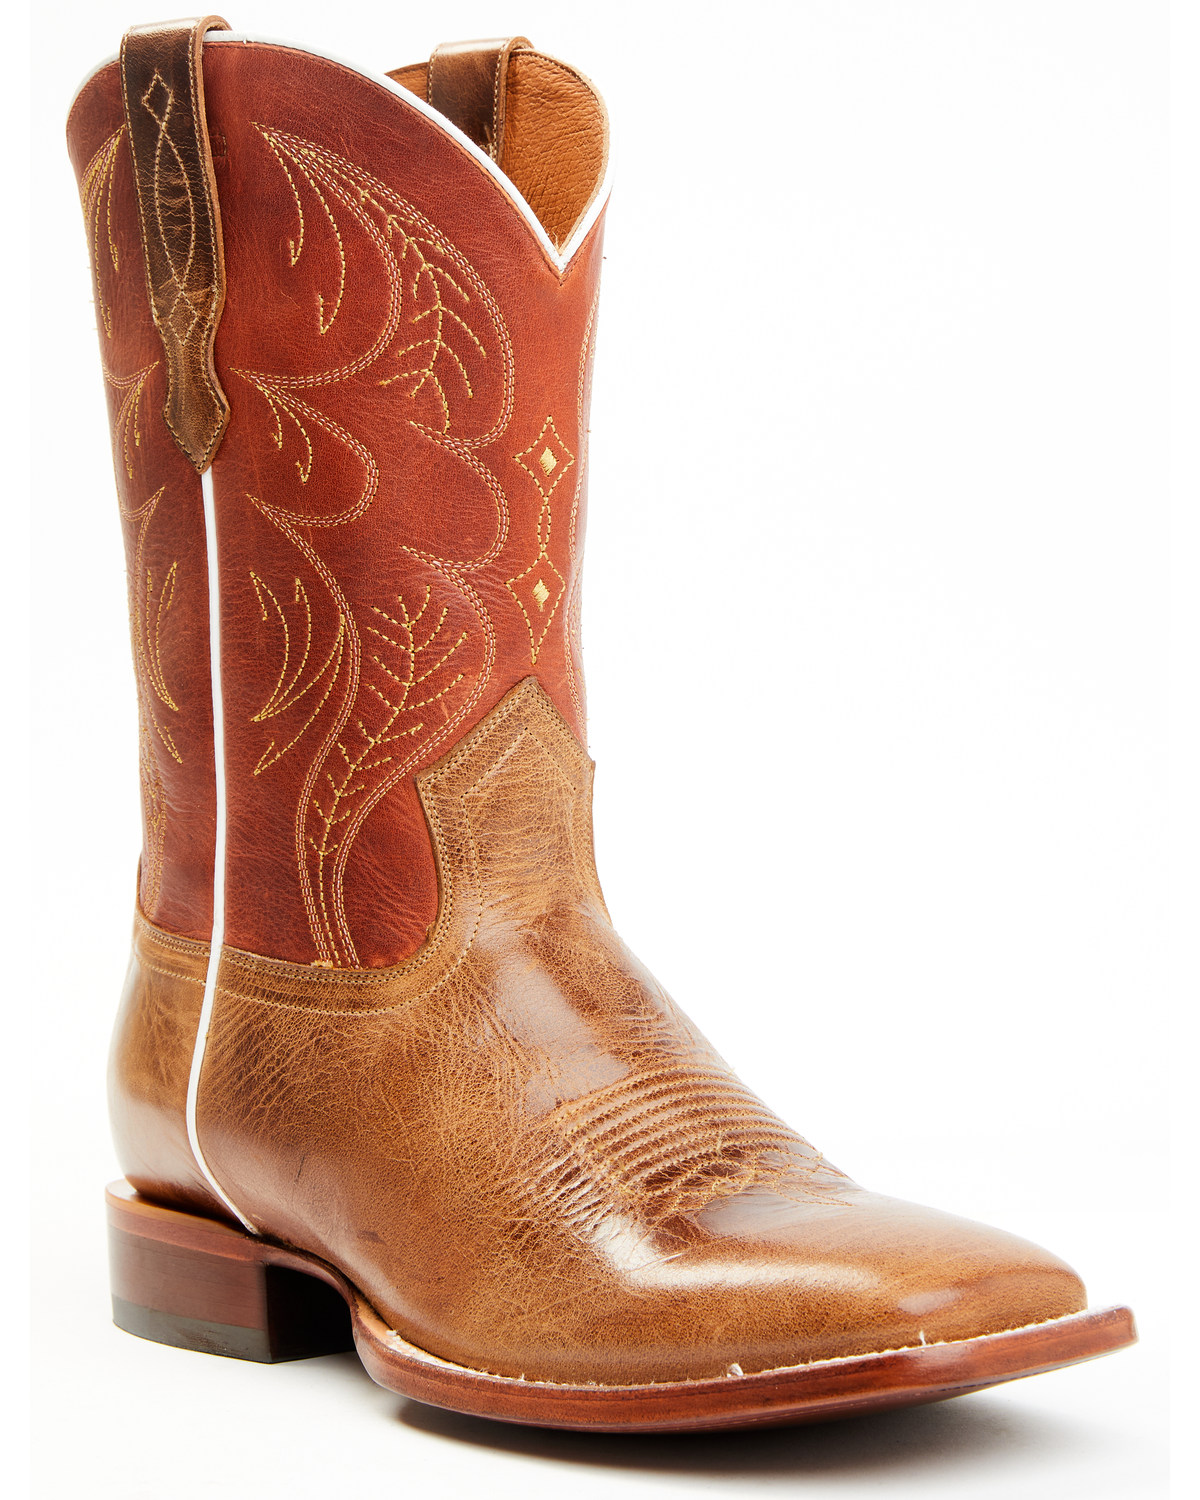 Cody James Men's Upper Two-Tone Leather Western Boots - Broad Square Toe